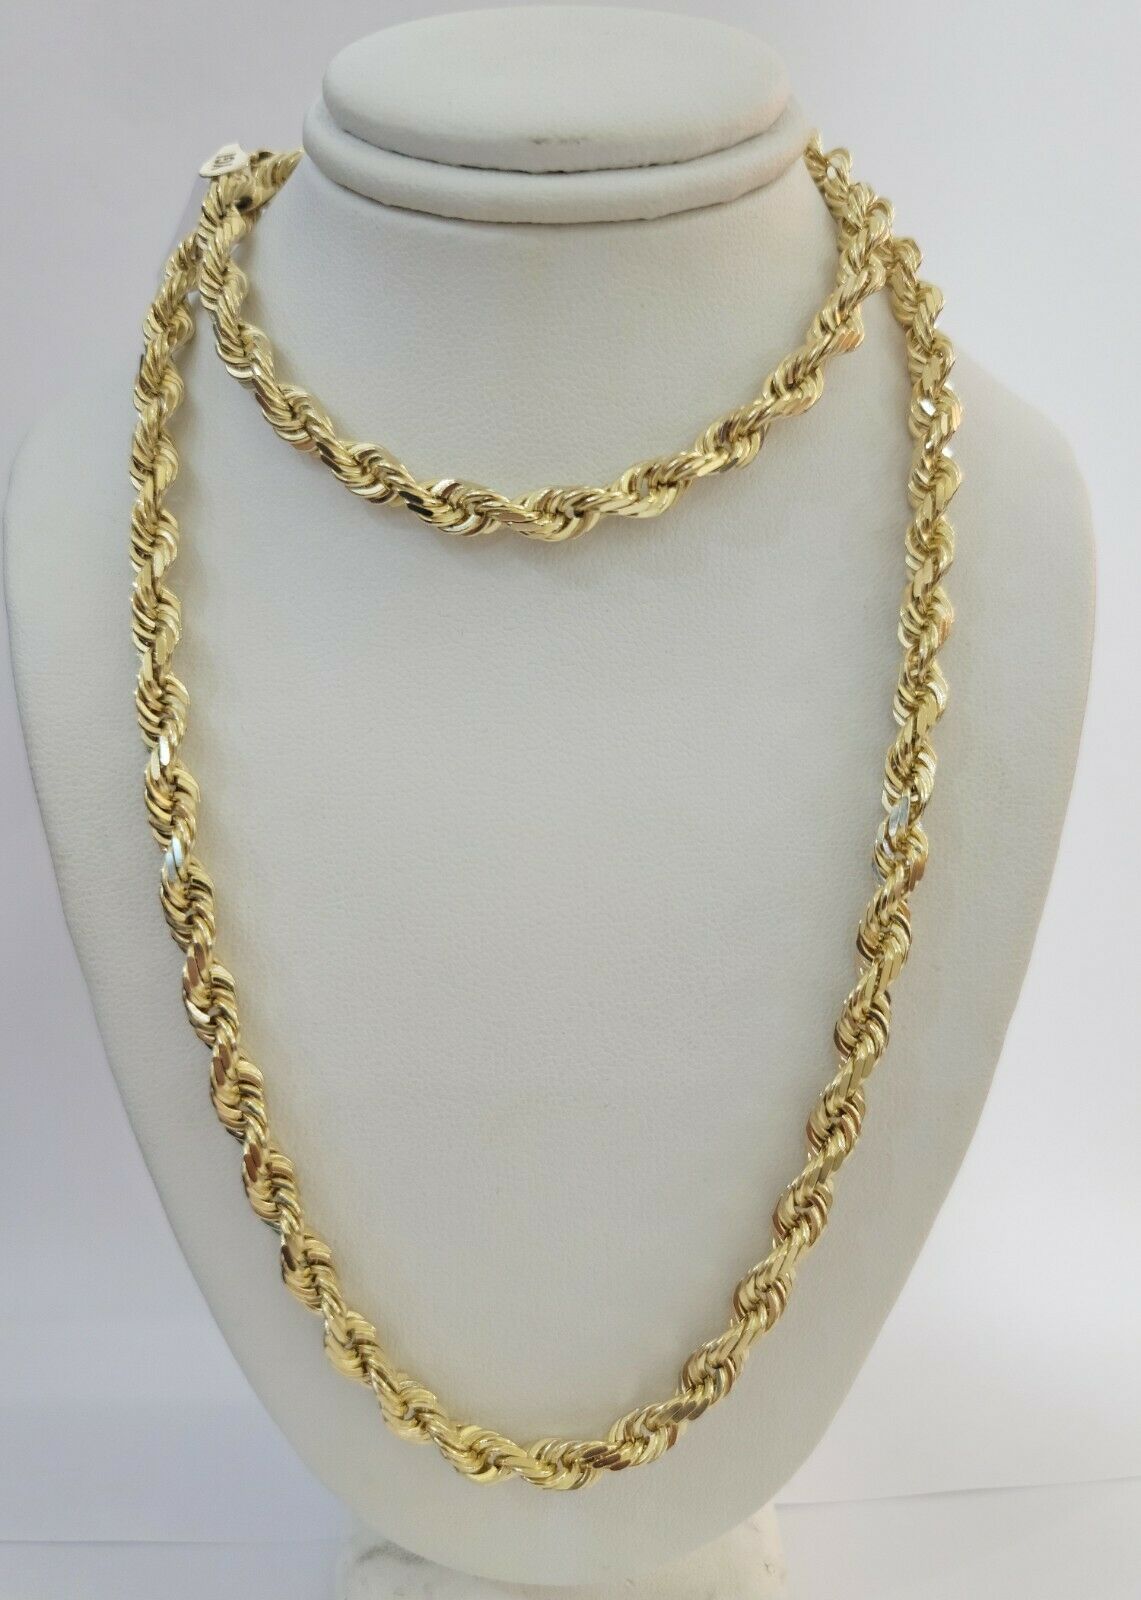 Solid 10k Yellow Gold Rope Chain Pendant Necklace 4mm-10mm Diamond Cut  18-30